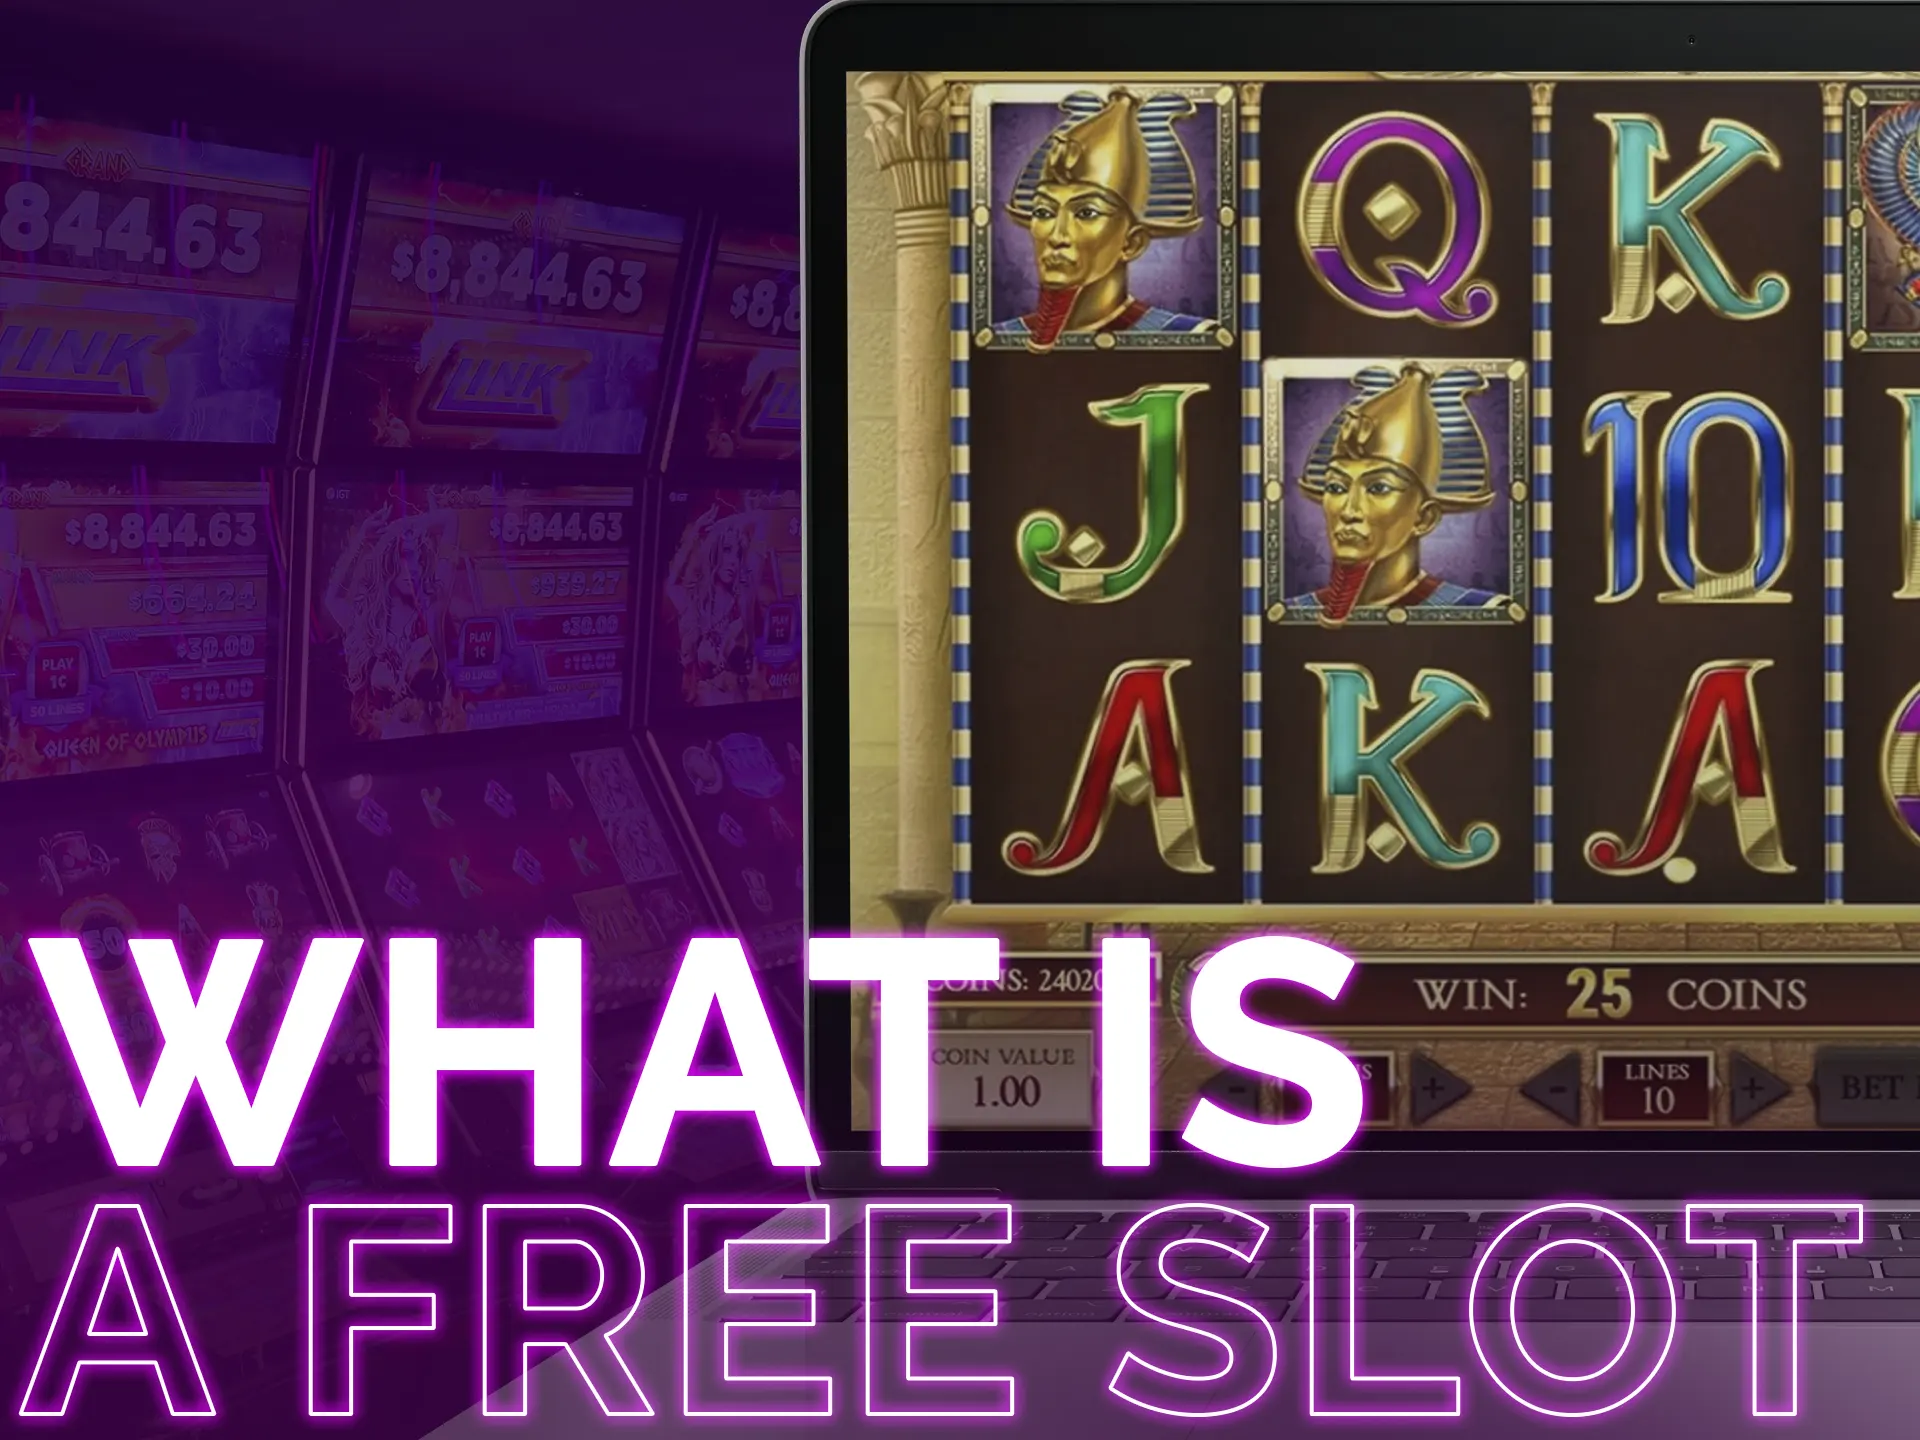 Free slots are games for beginners.